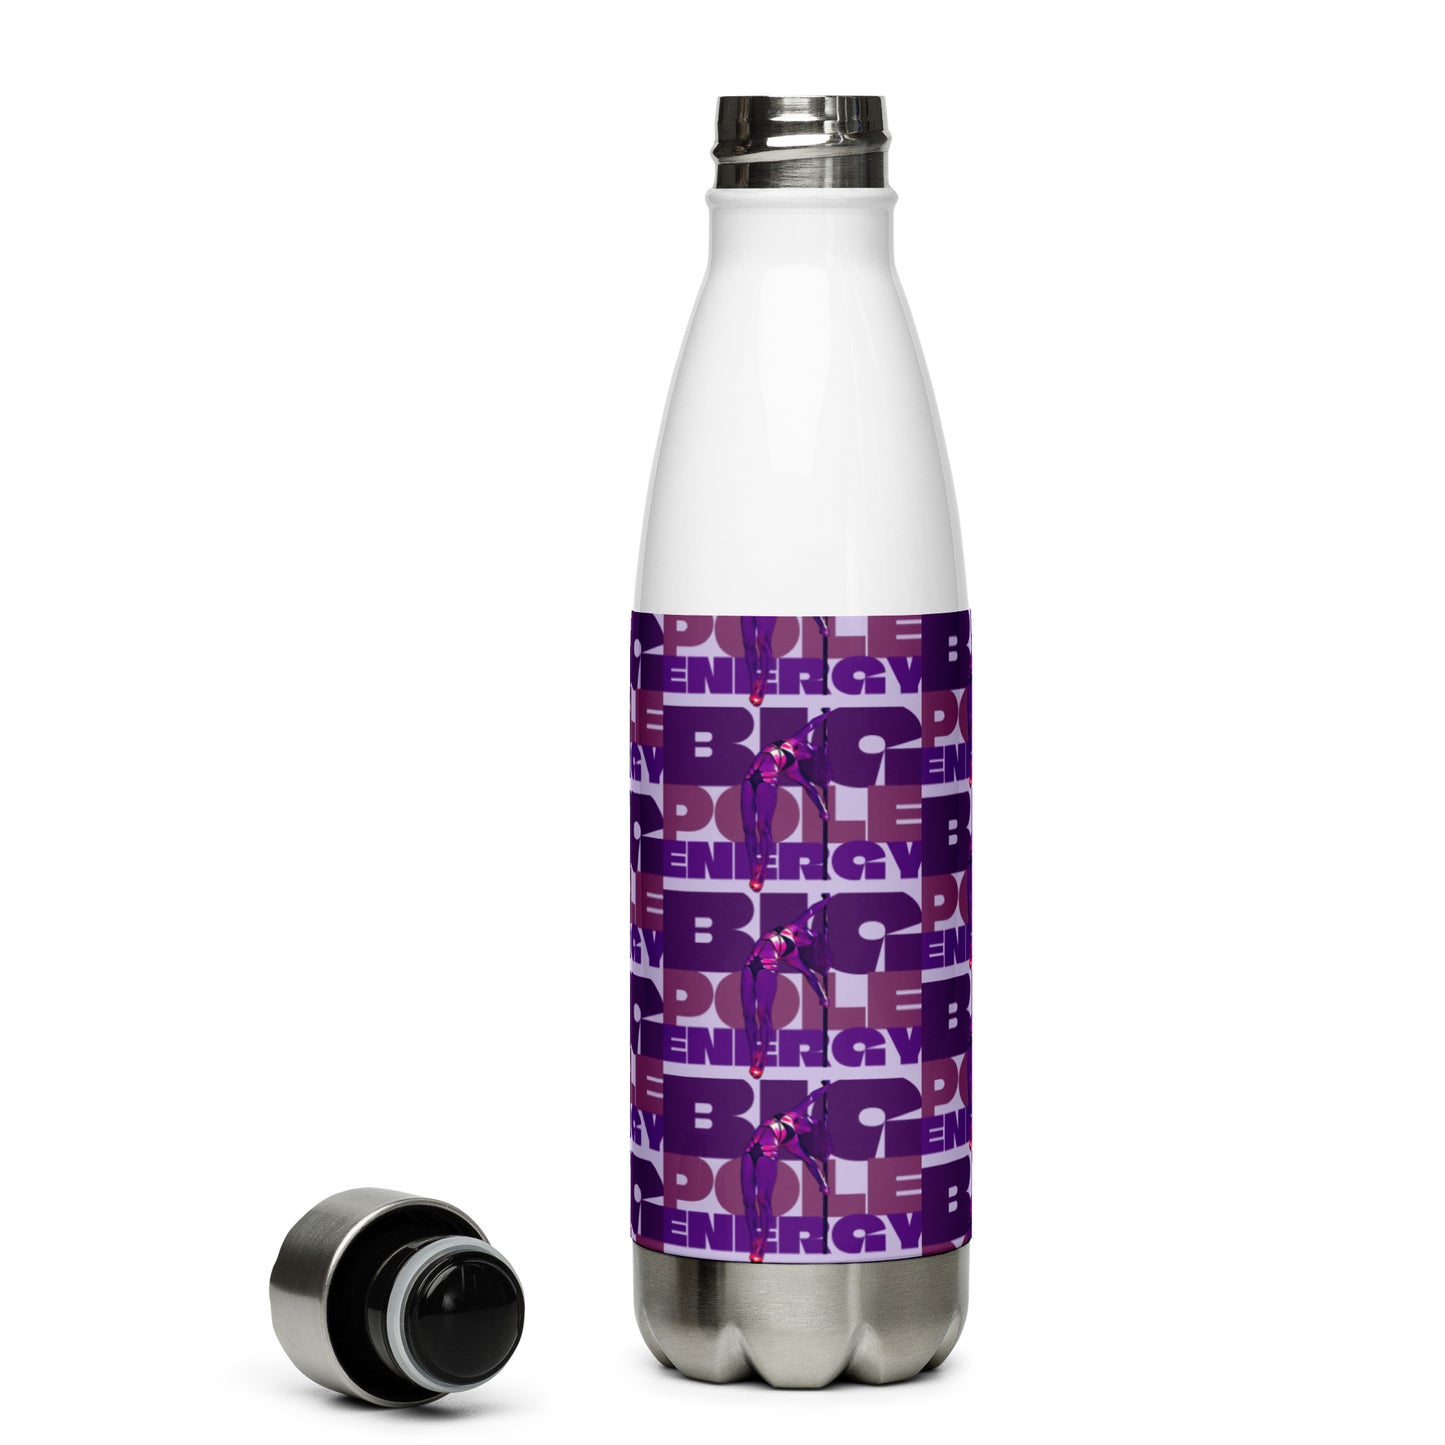 Big Pole Energy - Stainless Steel Water Bottle - Lavender